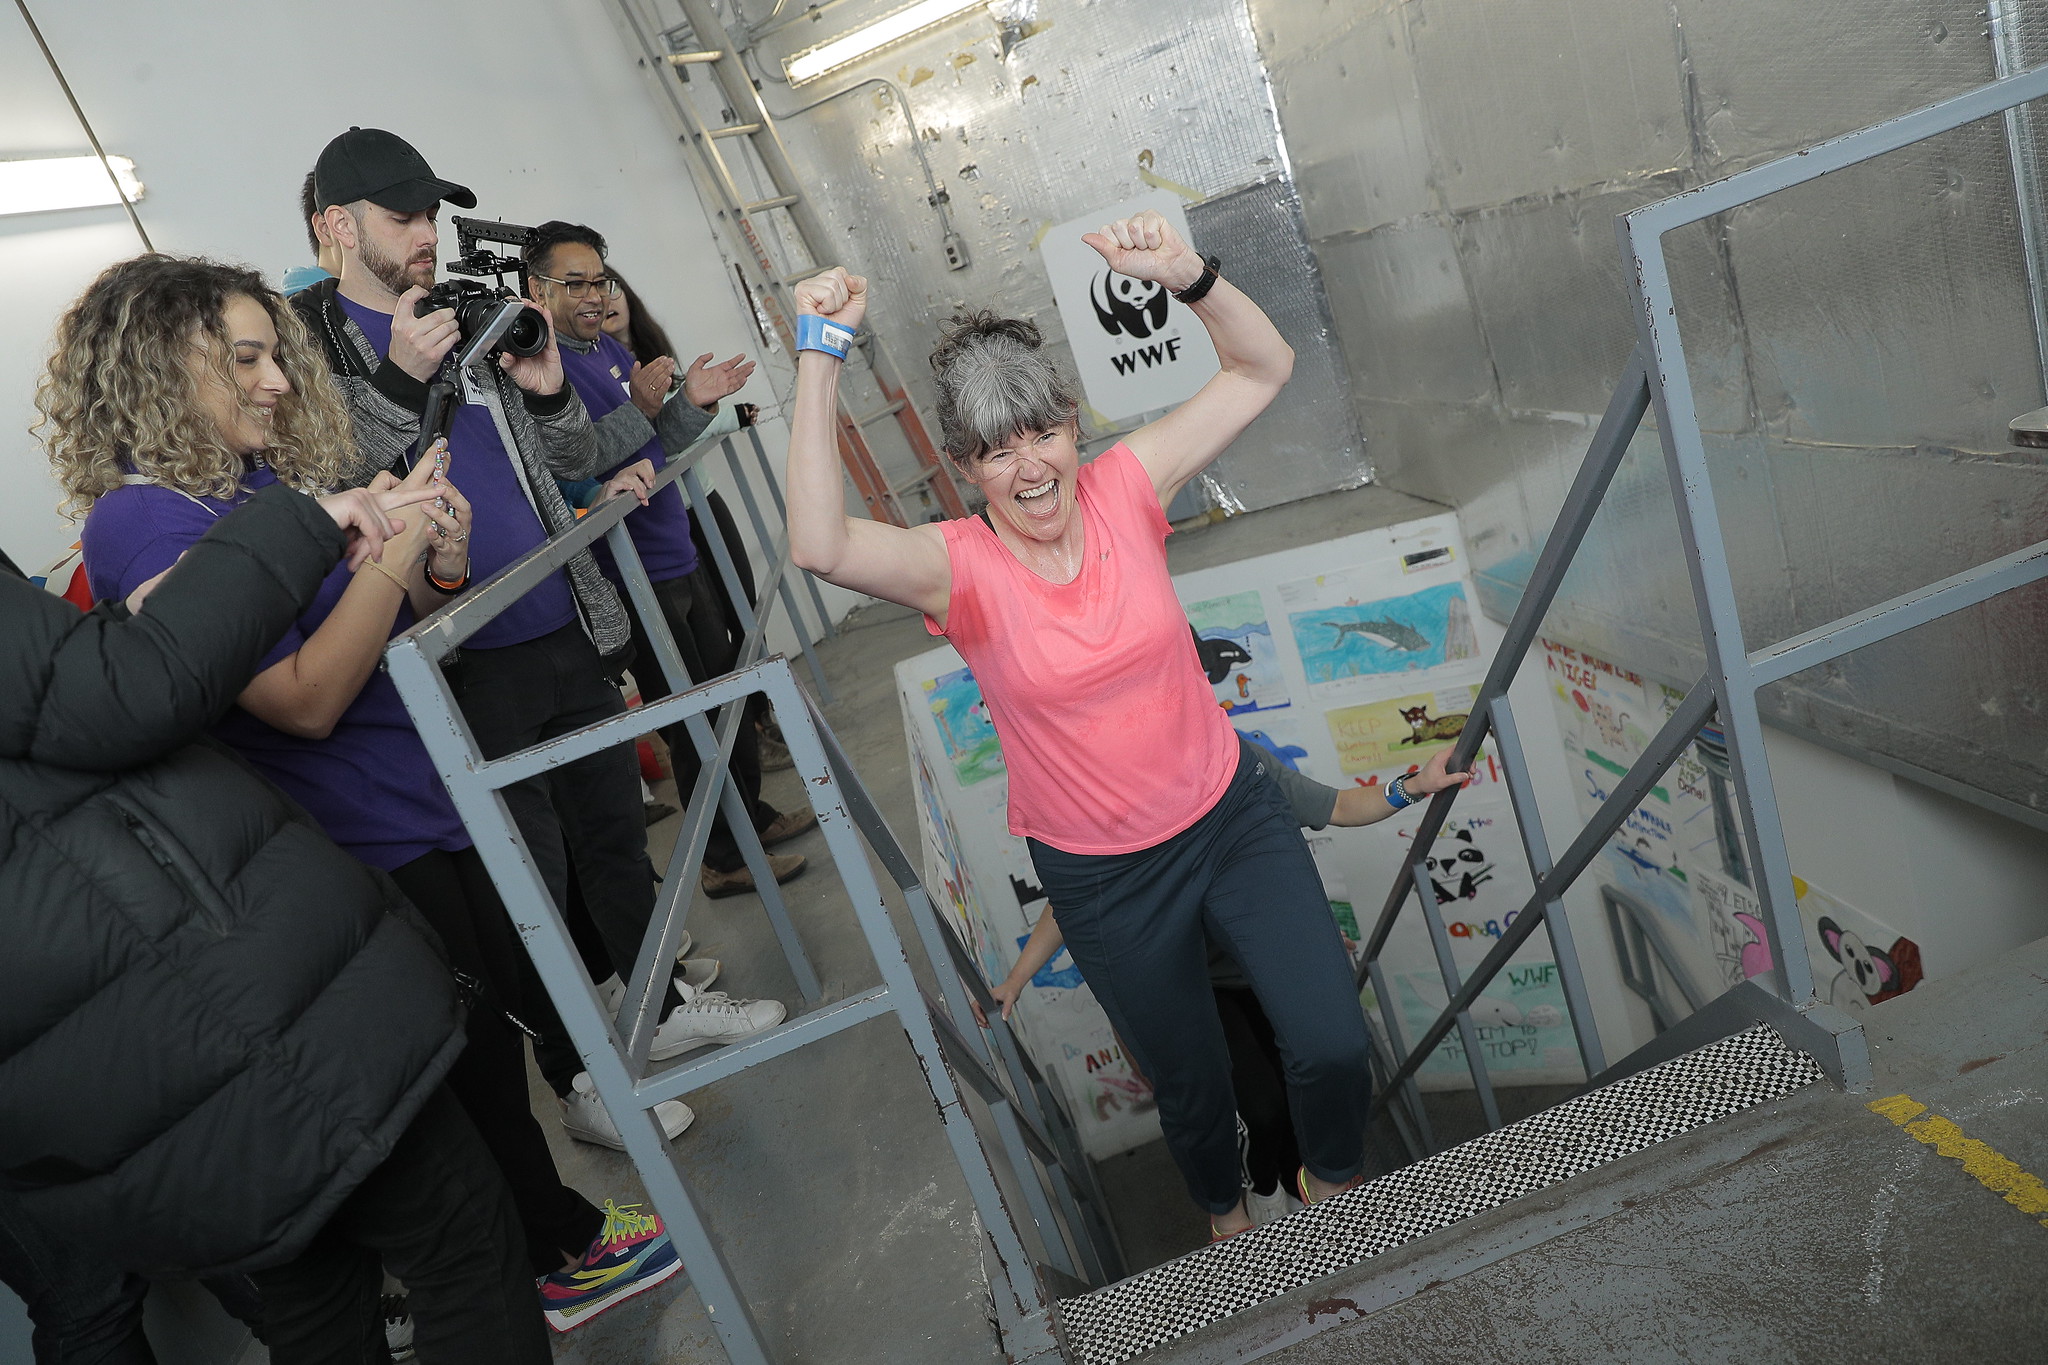 Woman in a pink shirt at the CN Tower Climb finish line